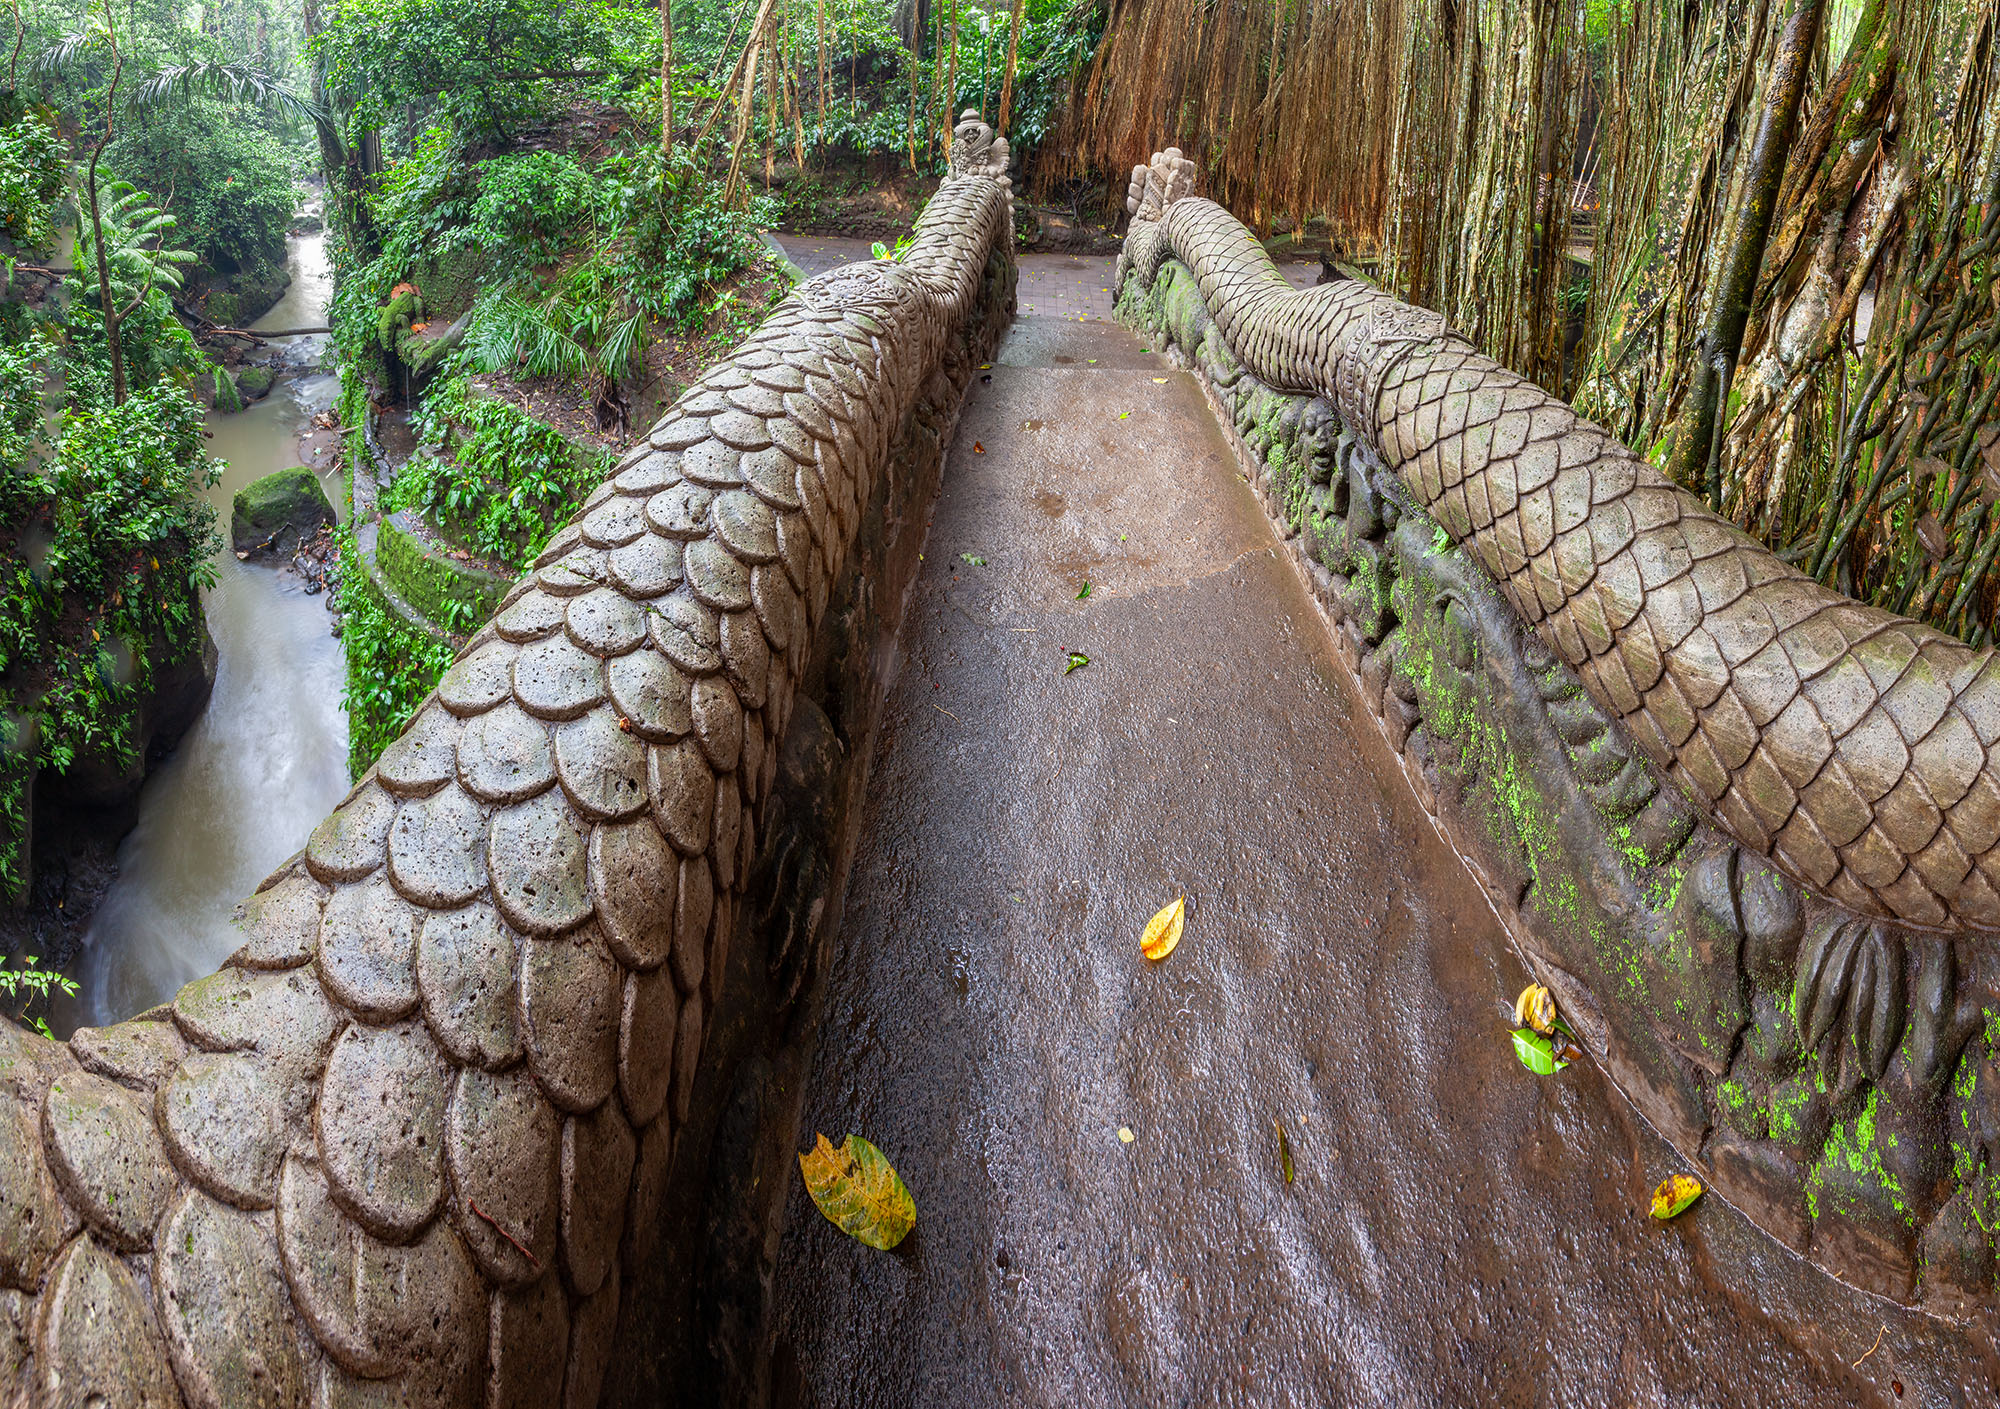 This image captures the Dragon Bridge in Ubud, Bali, from the perspective of crossing it. As you traverse the bridge, the lush...